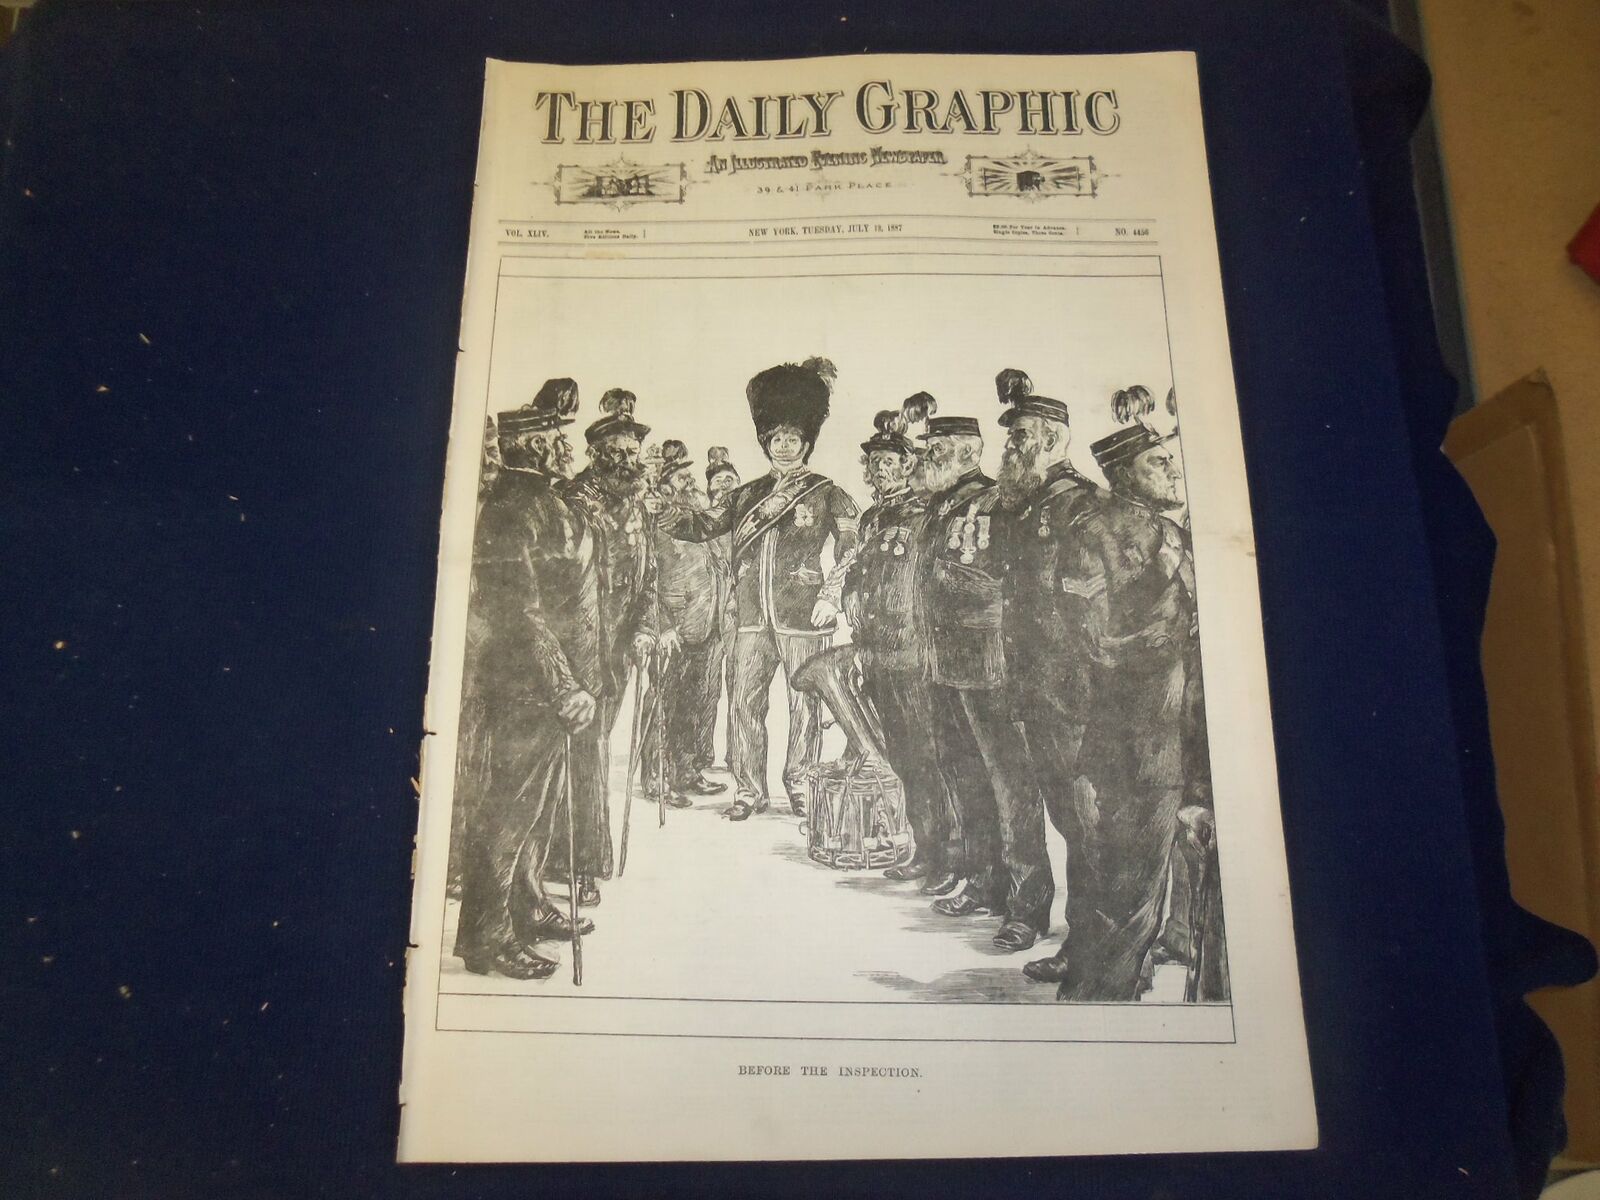 1887 JULY 12 THE DAILY GRAPHIC NEWSPAPER - BEFORE THE INSPECTION - NT 7657